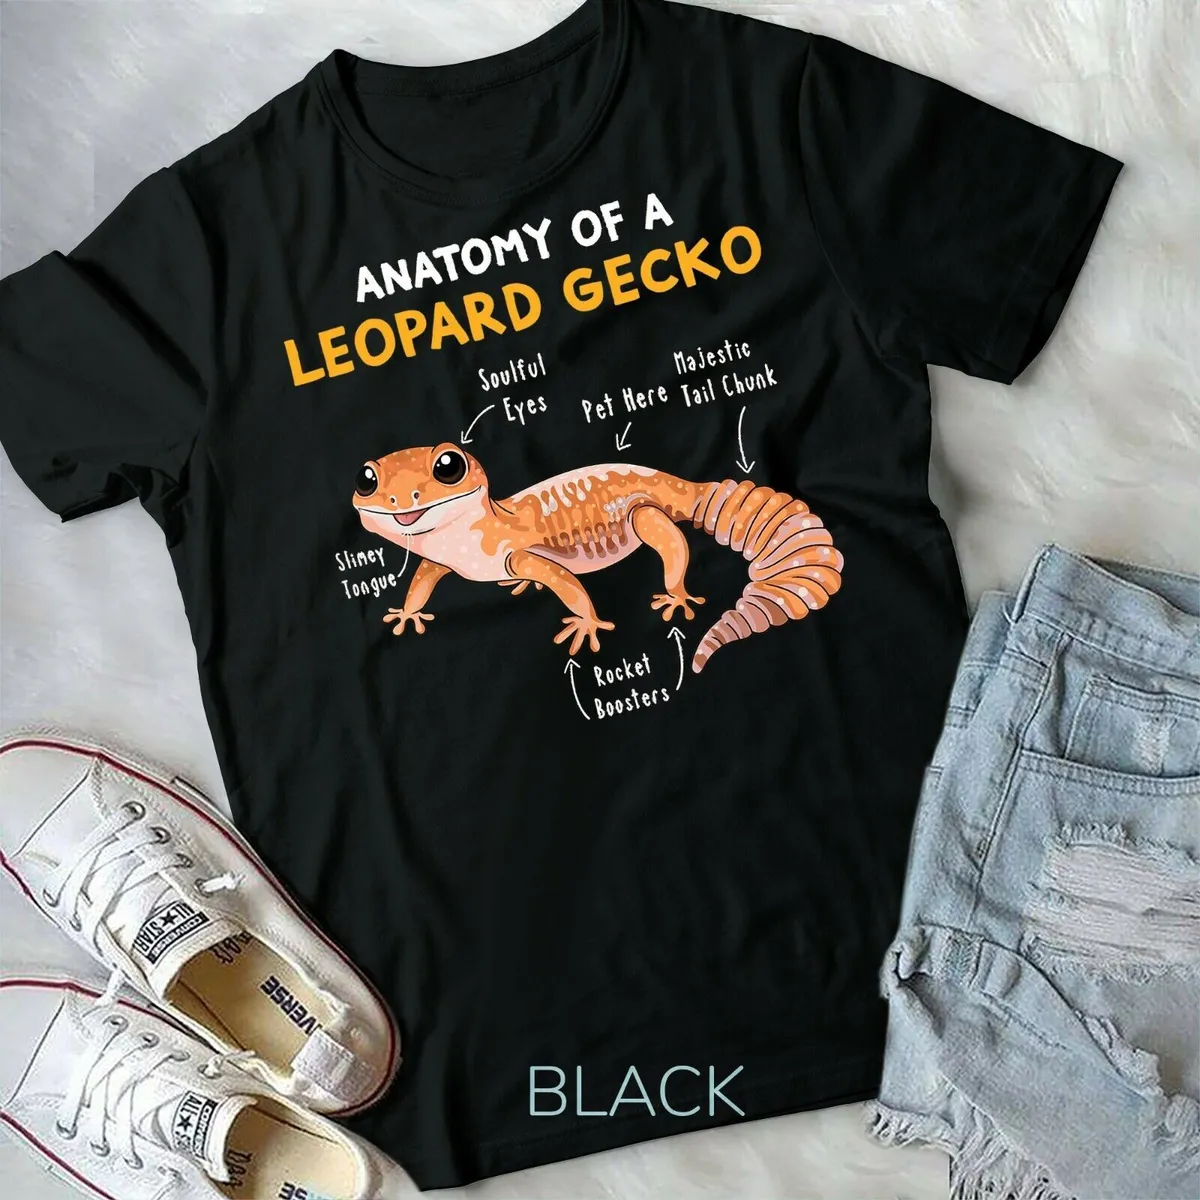 Where to Find the Best Leopard Gecko Shirts